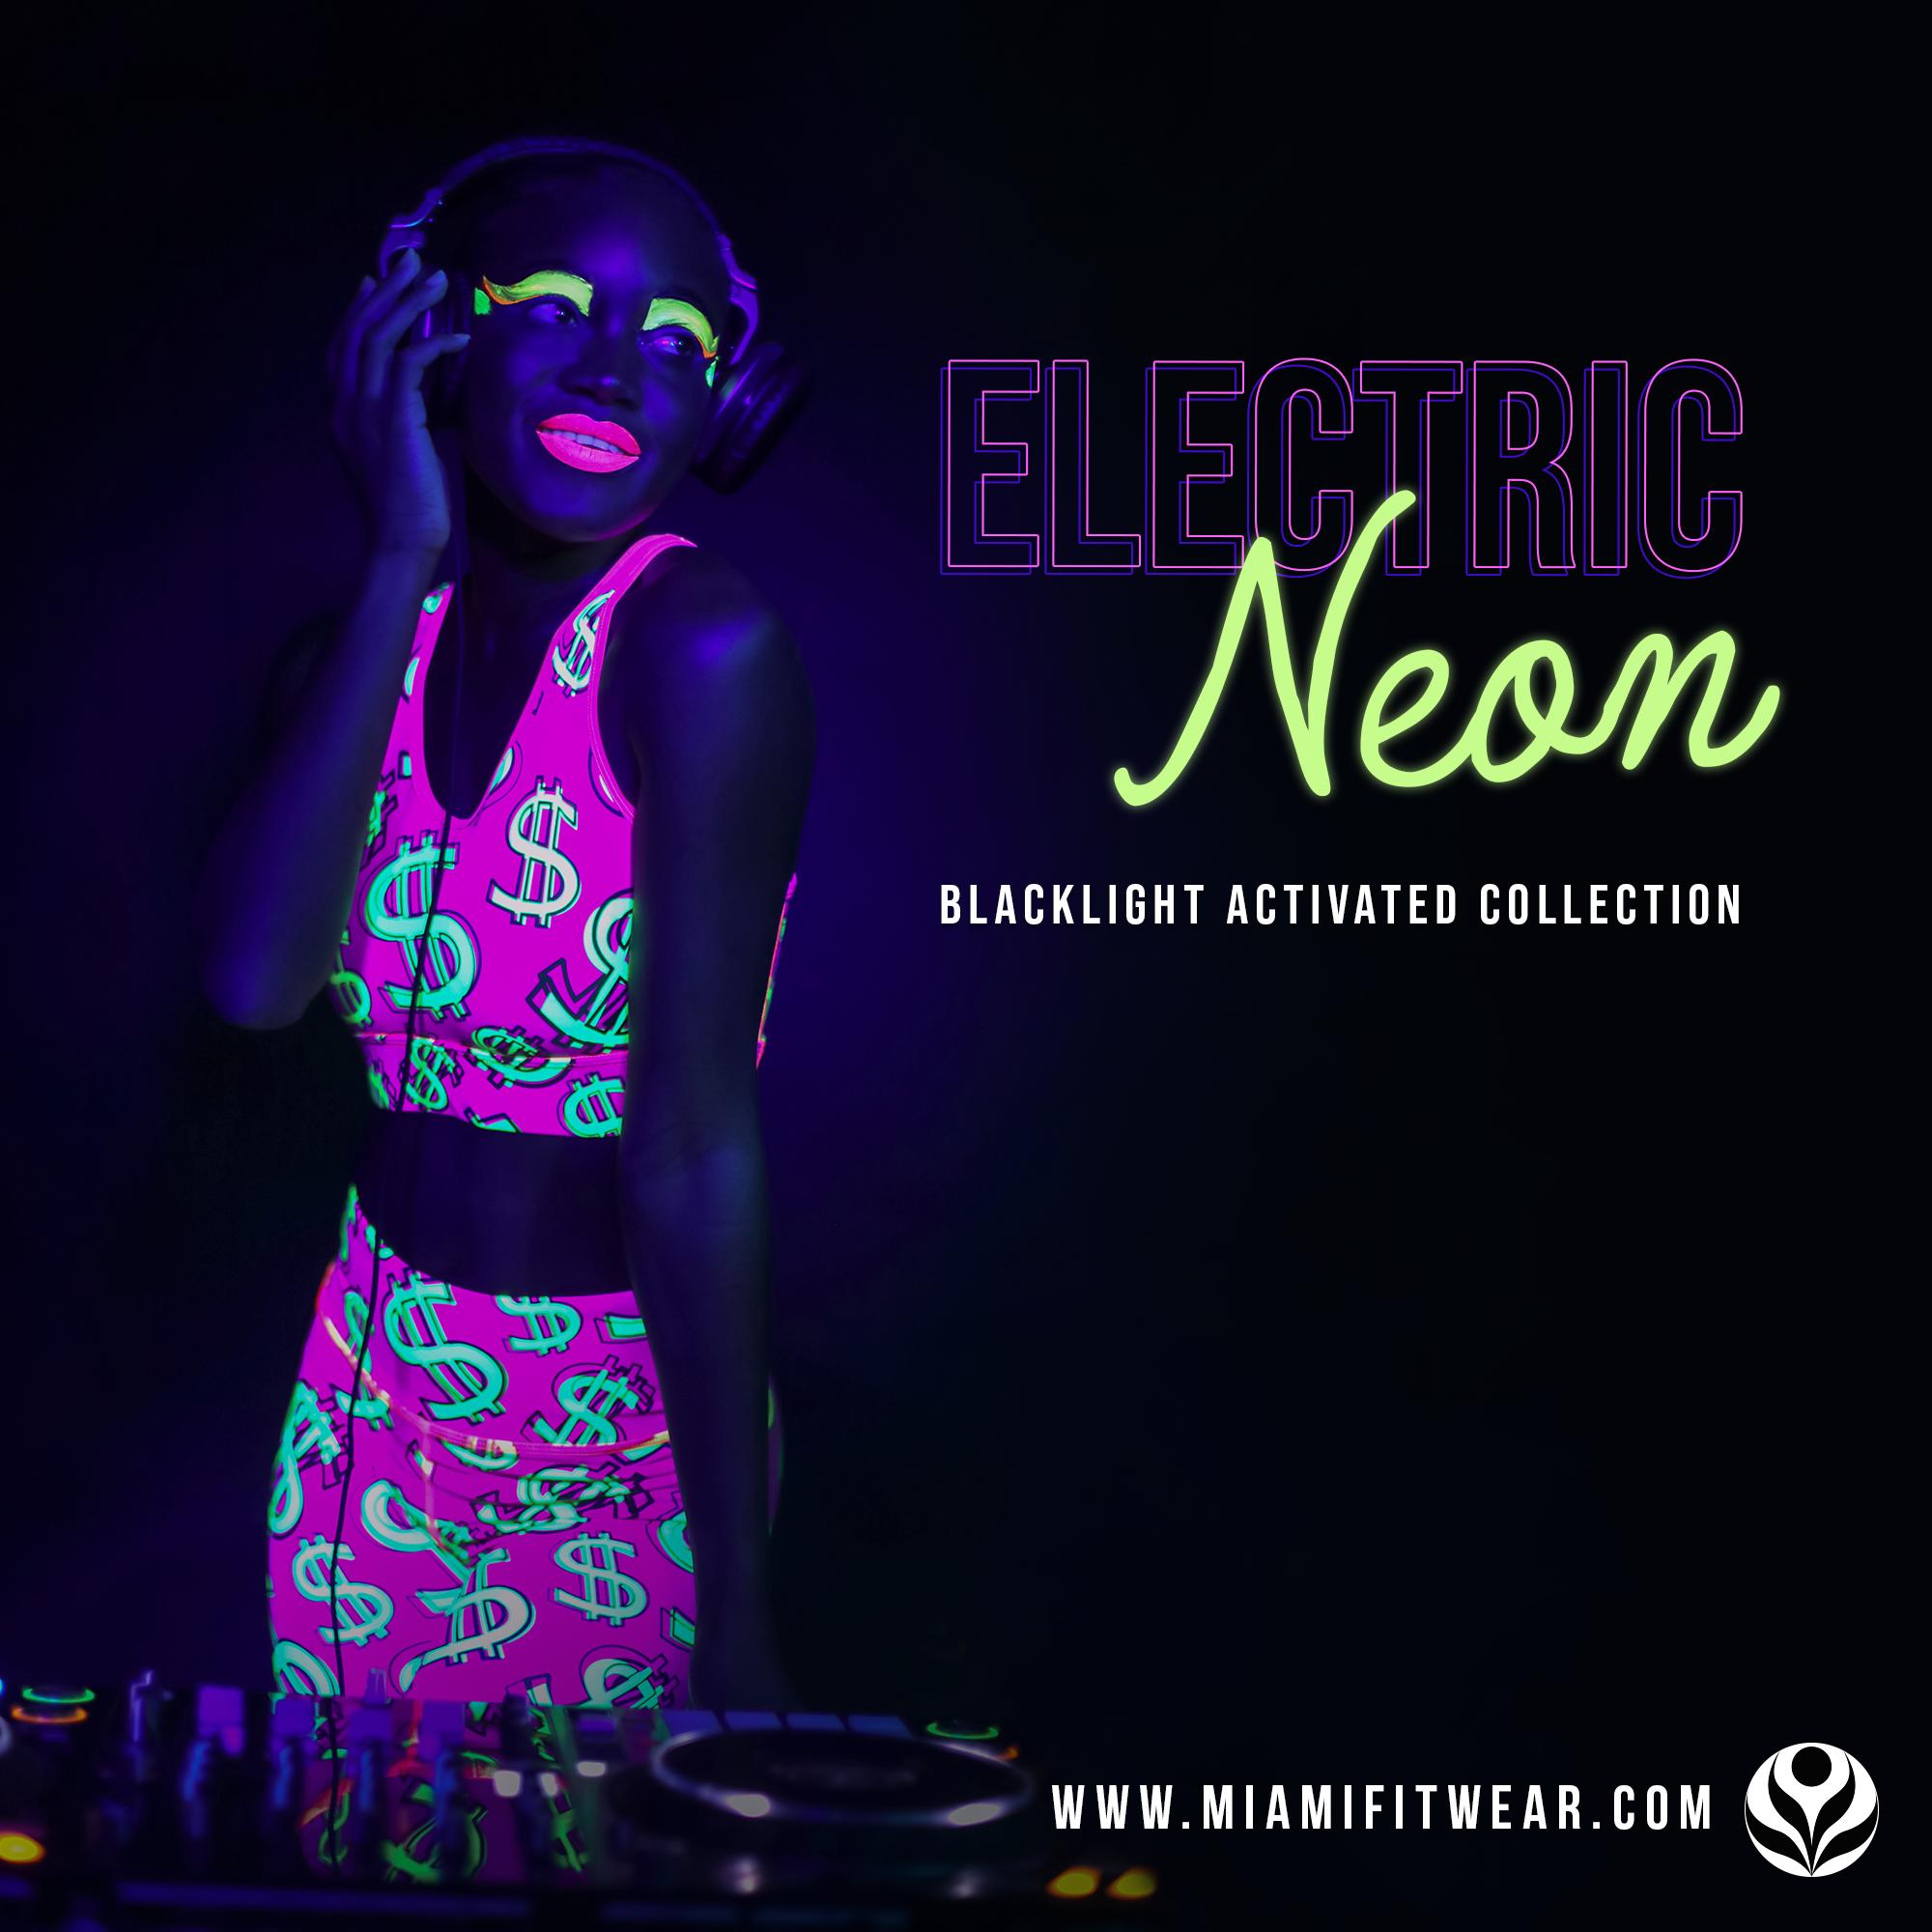 Electric Neon - Blacklight Activated Collection